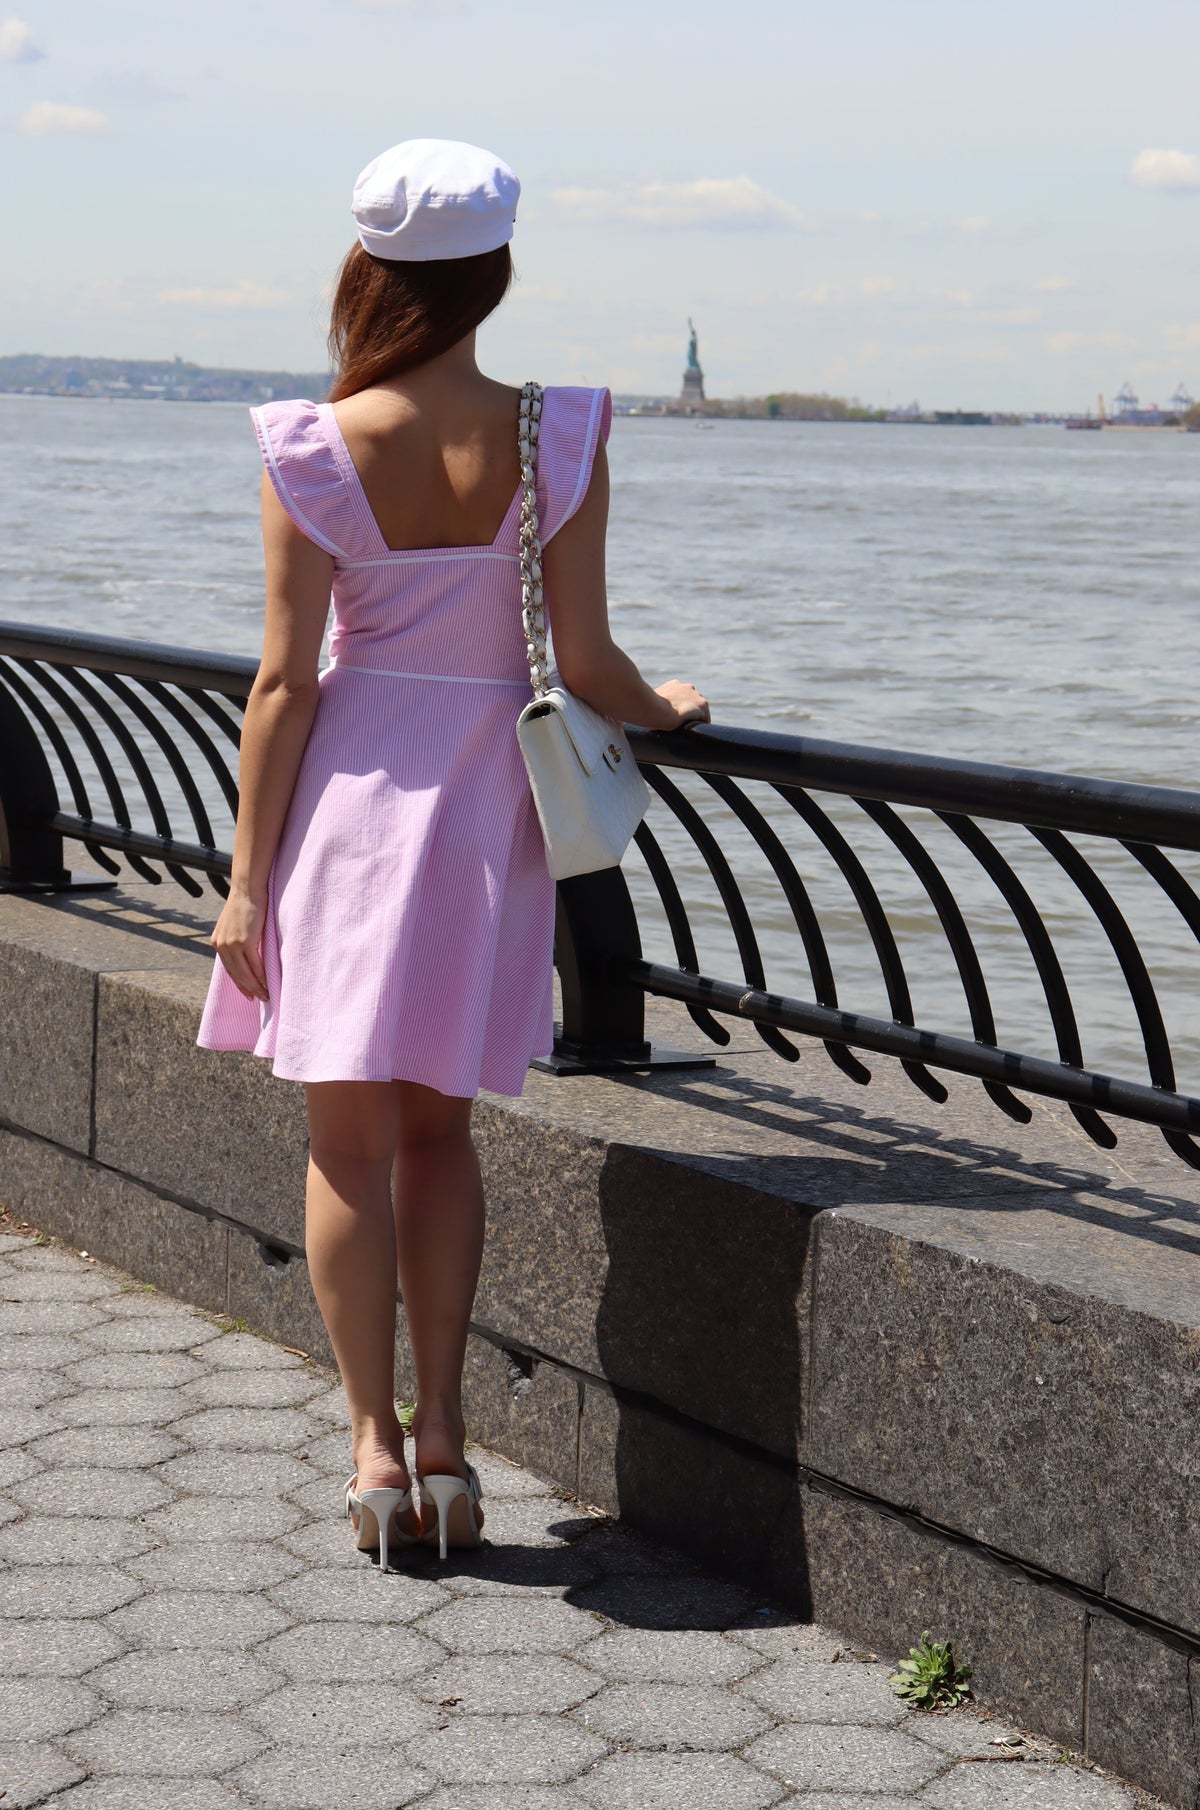 Back of model wearing a white hat and a pink and white seersucker dress with a white bow in front of water.